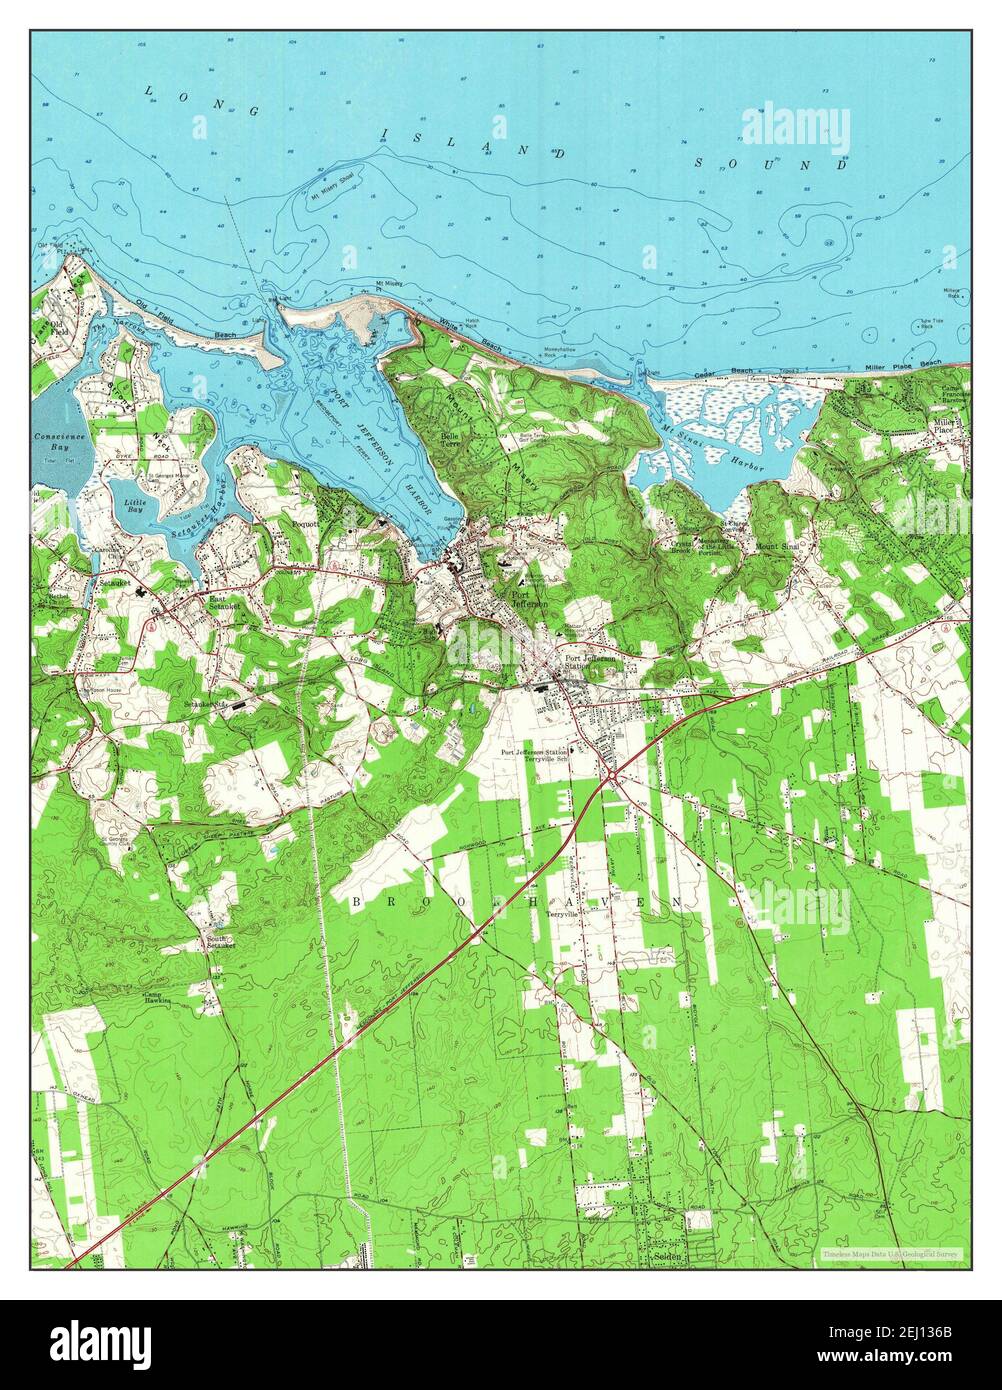 Port Jefferson, New York, map 1955, 1:24000, United States of America by Timeless Maps, data U.S. Geological Survey Stock Photo